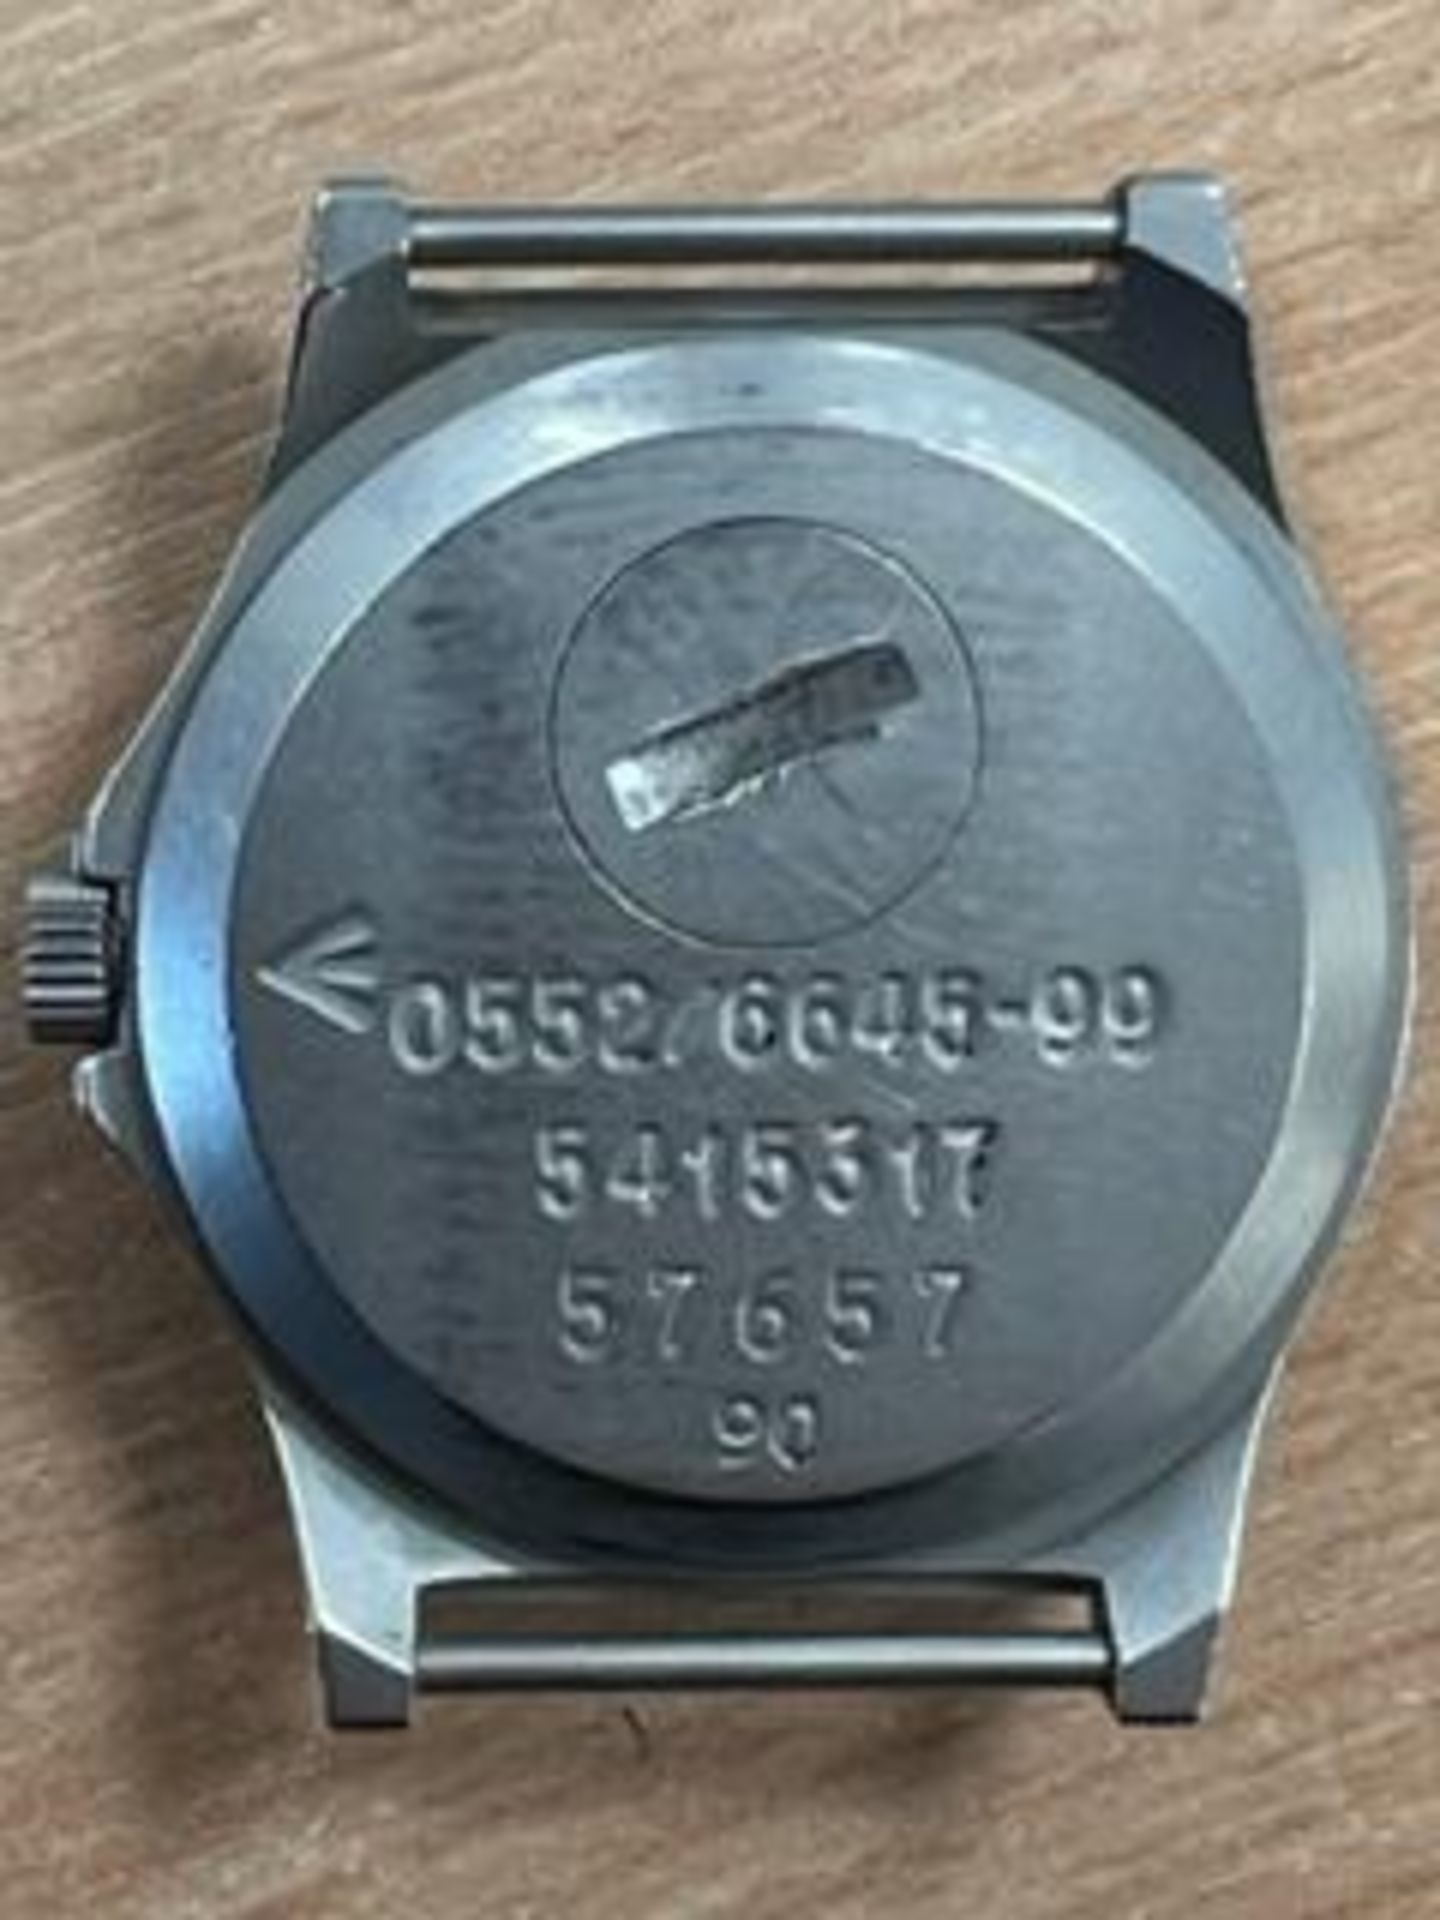 CWC 0552 ROYAL MARINES ISSUE SERVICE WATCH NATO MARKS DATE 1990 **GULF WAR** - Image 5 of 7